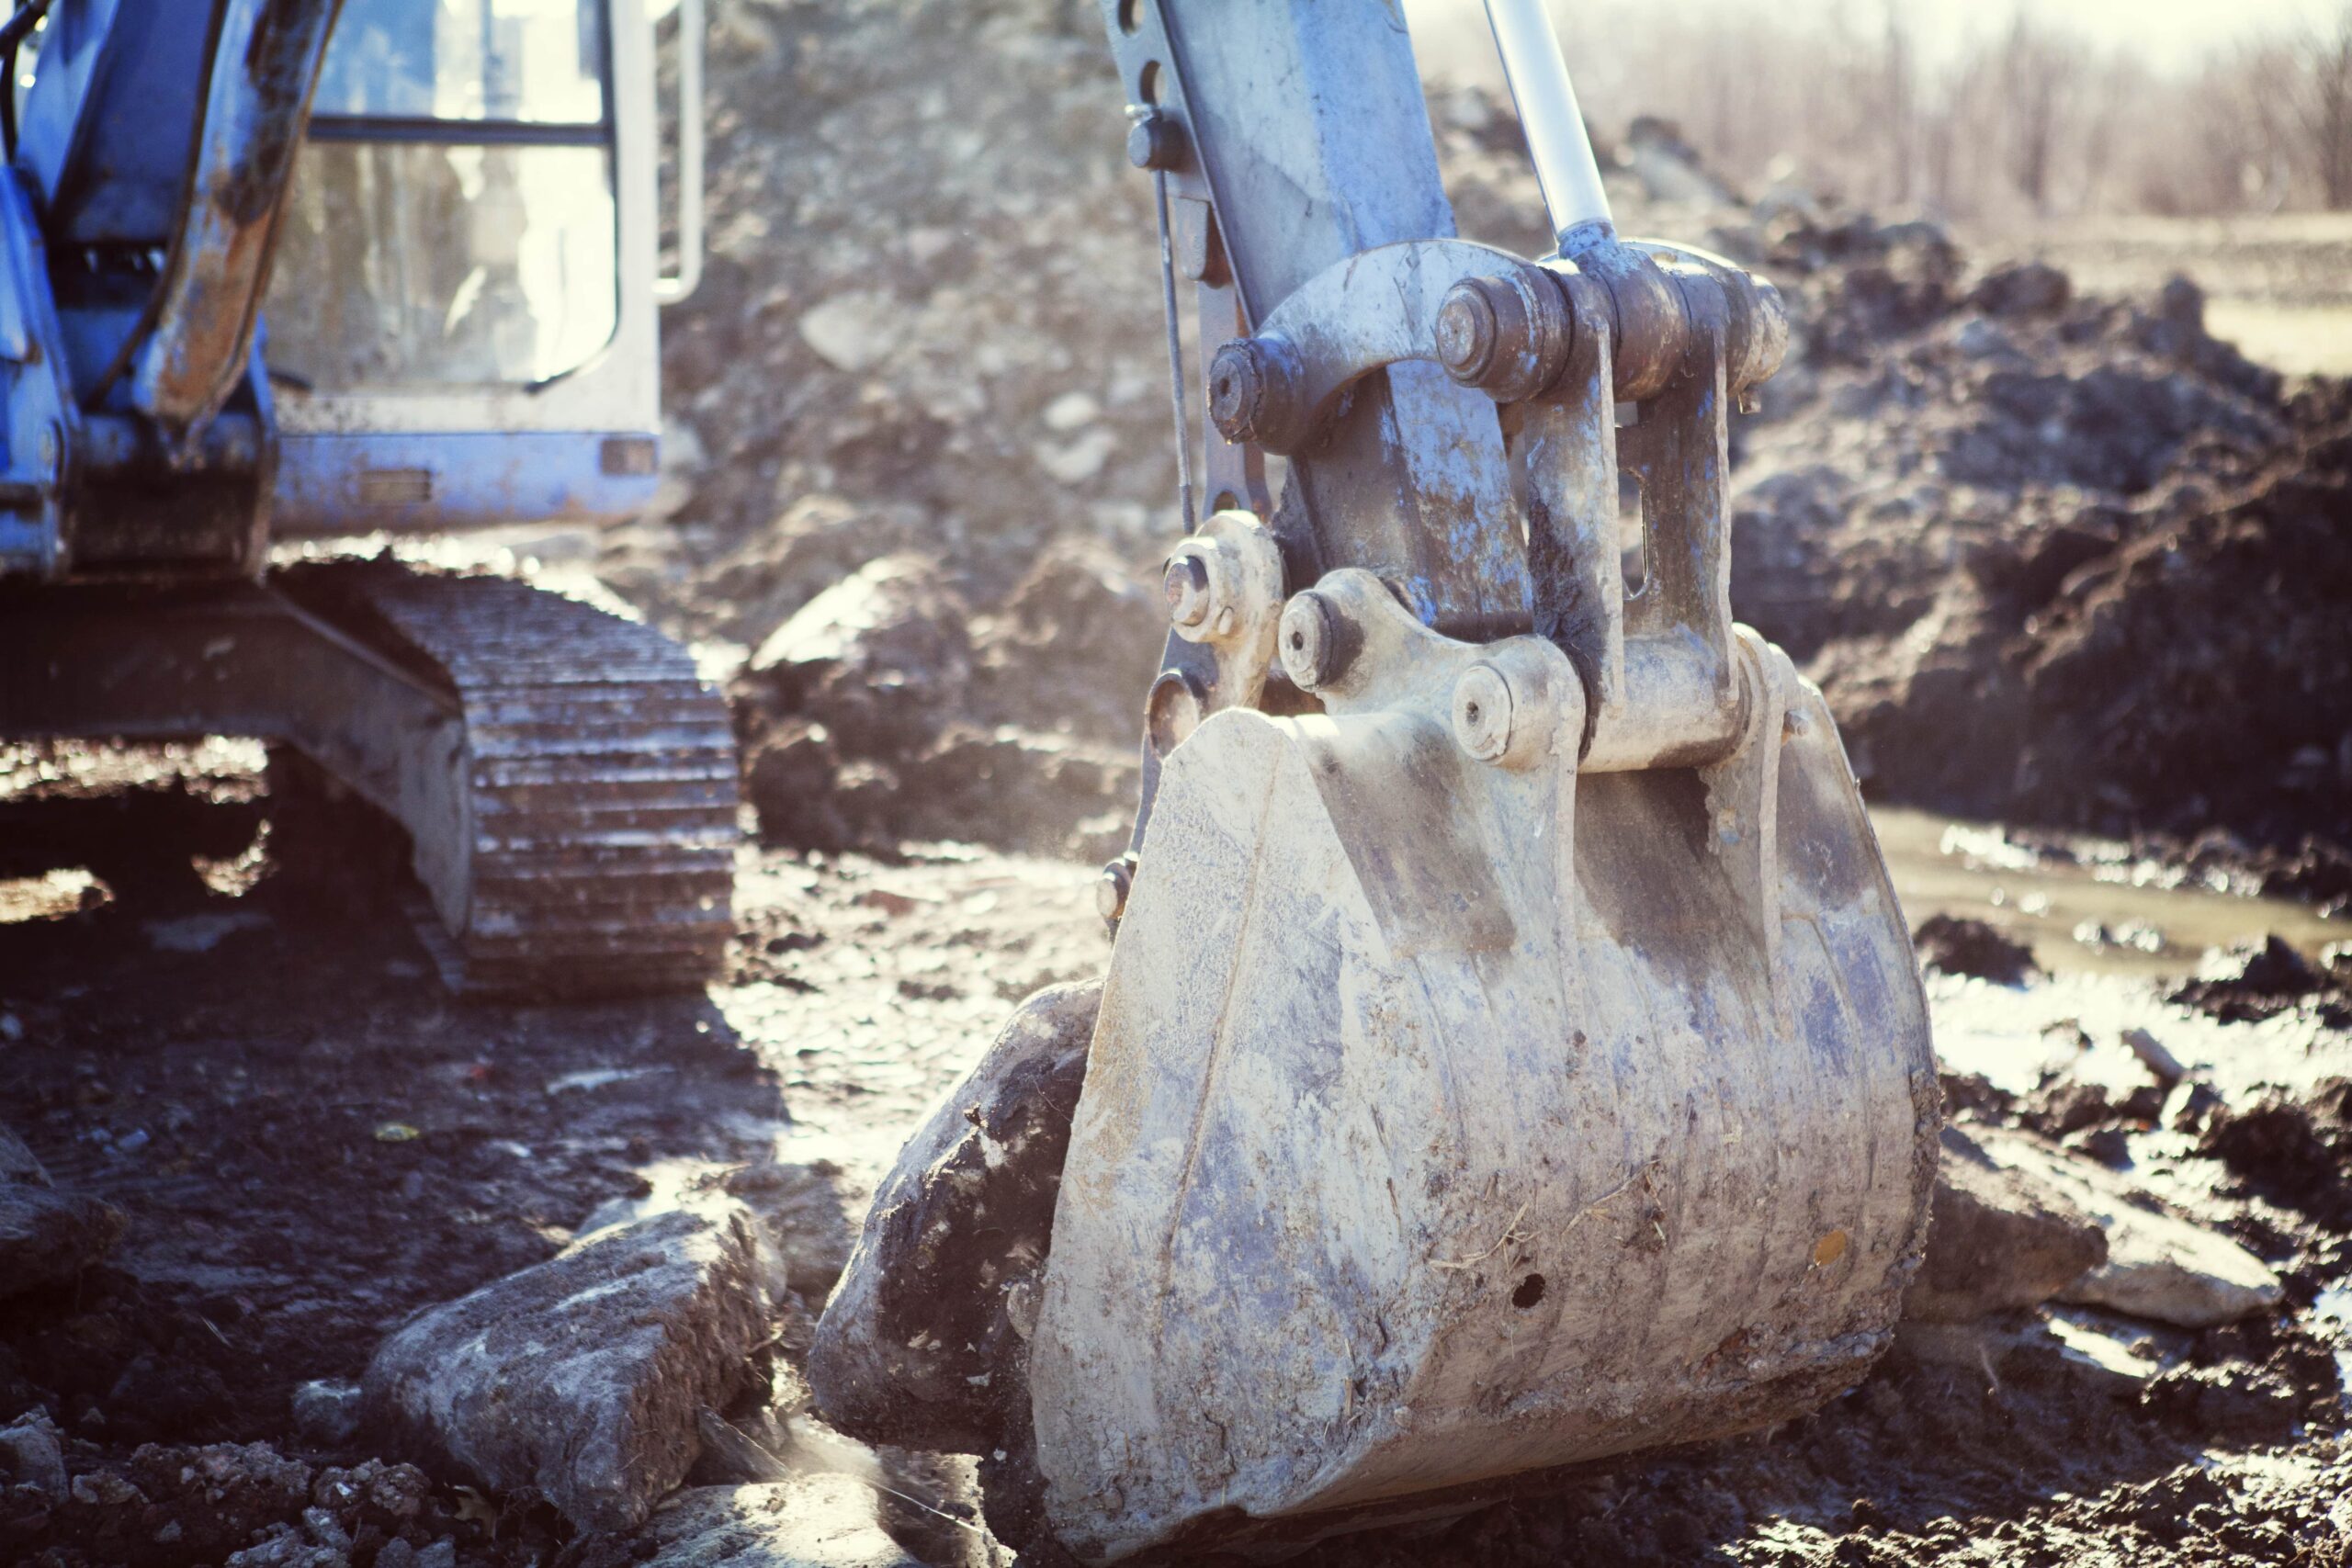 Earthmoving equipment and construction